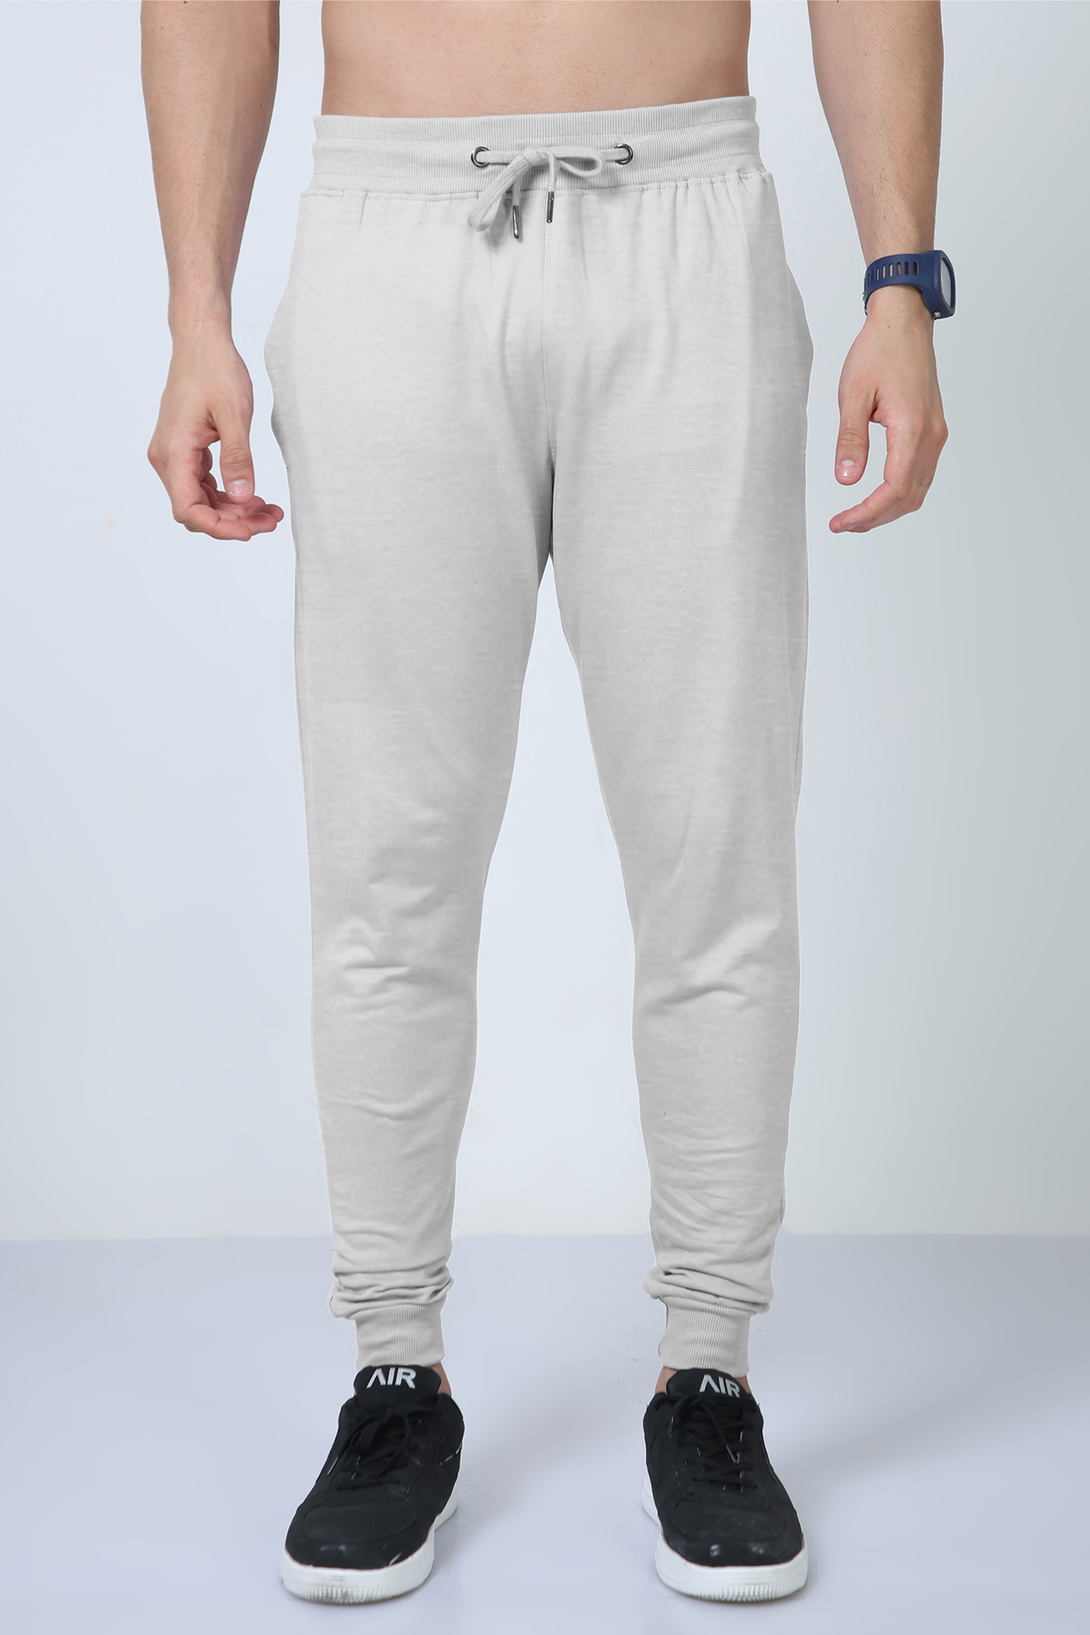 Joggers For Men - WowWaves - 5